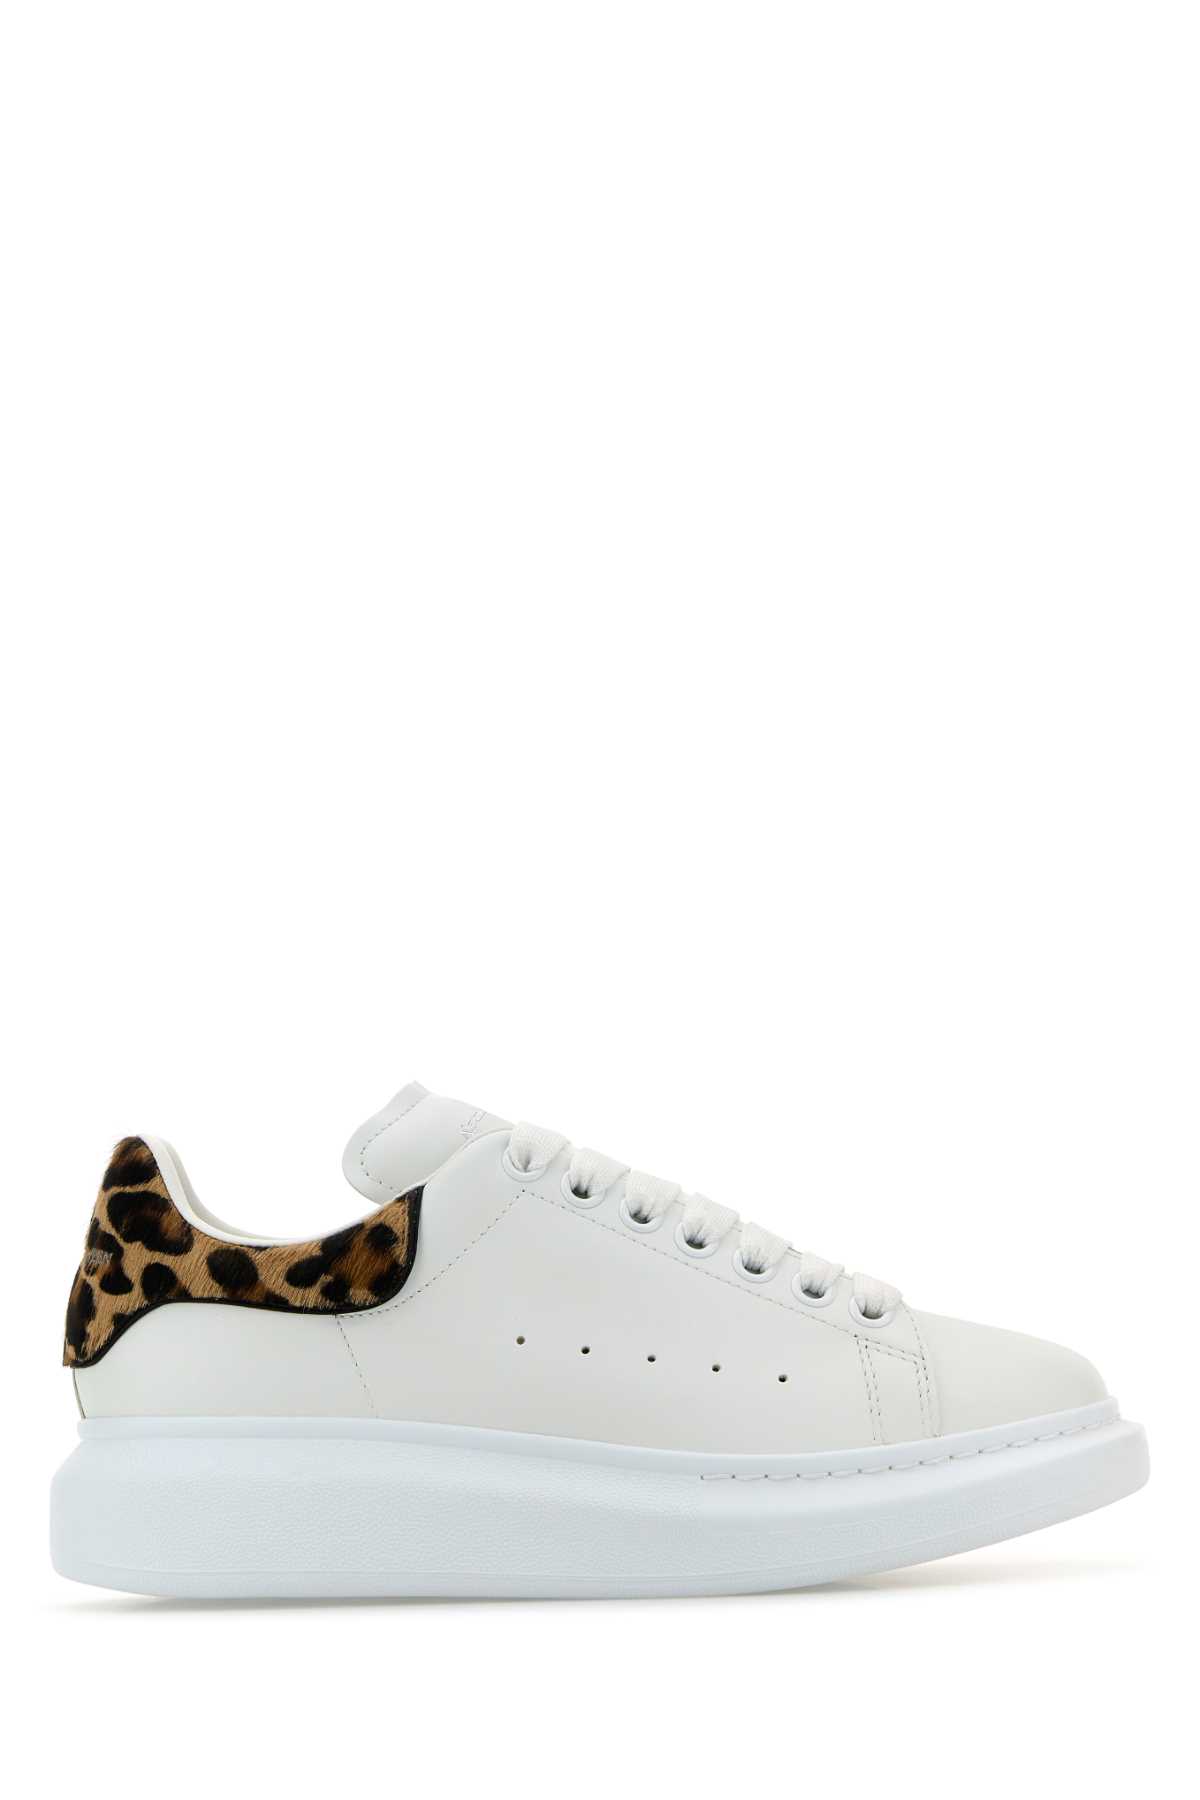 White Leather Sneakers With Printed Calf Hair Heel